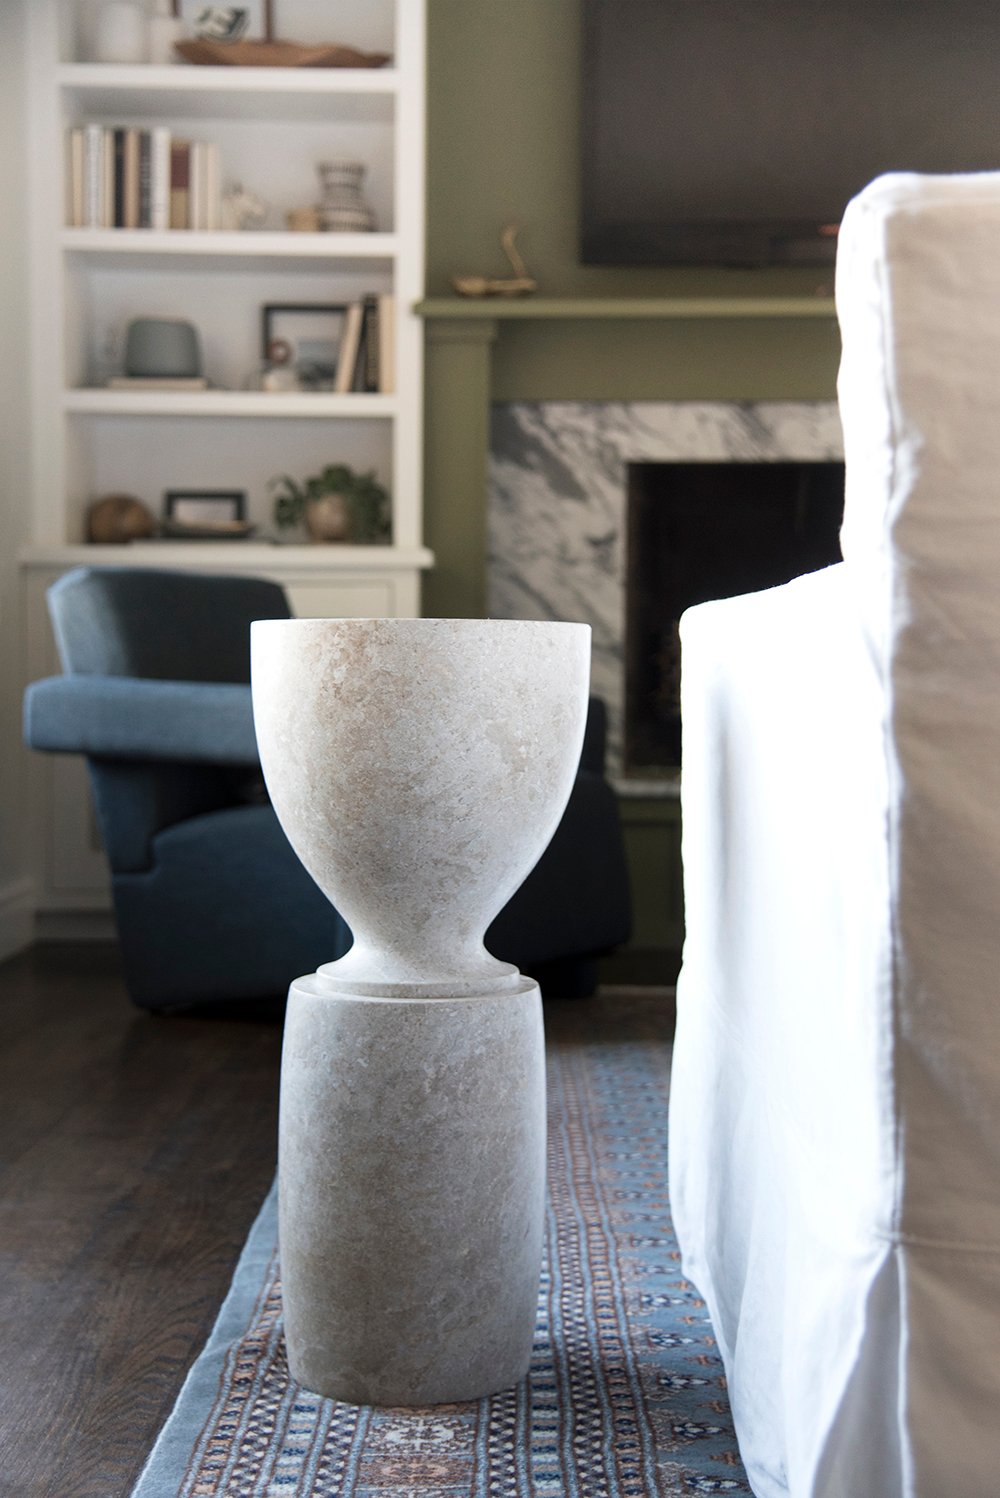 Sculptural and Pedestal Side Tables Roundup - roomfortuesday.com